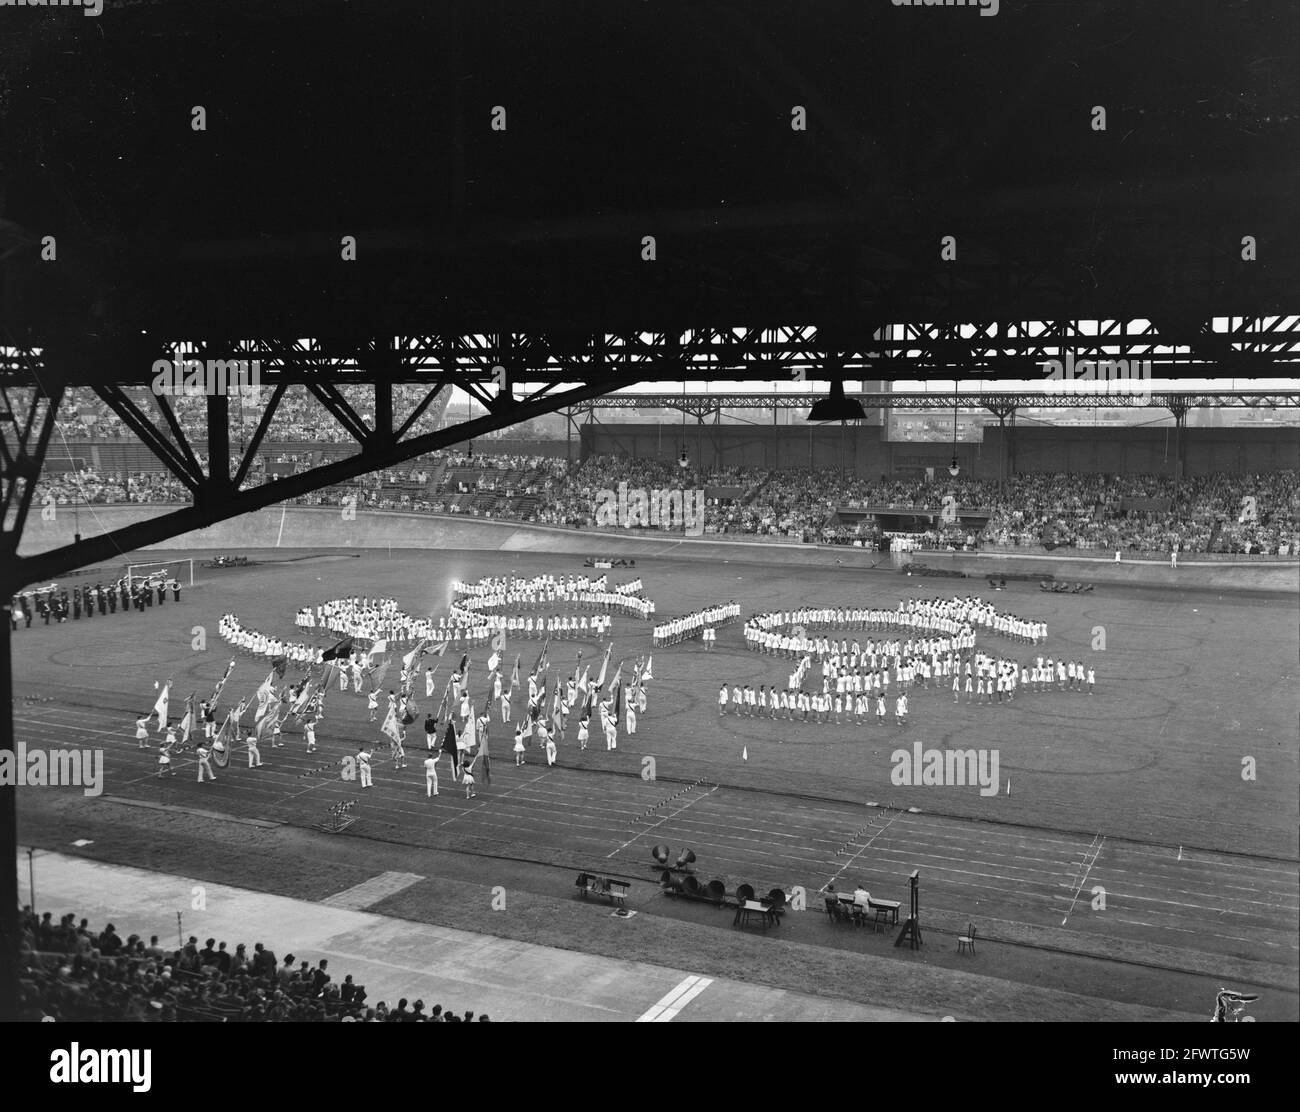 Olympic Day Stadion Amsterdam, overview gymnastics, June 13, 1954, STADIONS, overviews, The Netherlands, 20th century press agency photo, news to remember, documentary, historic photography 1945-1990, visual stories, human history of the Twentieth Century, capturing moments in time Stock Photo